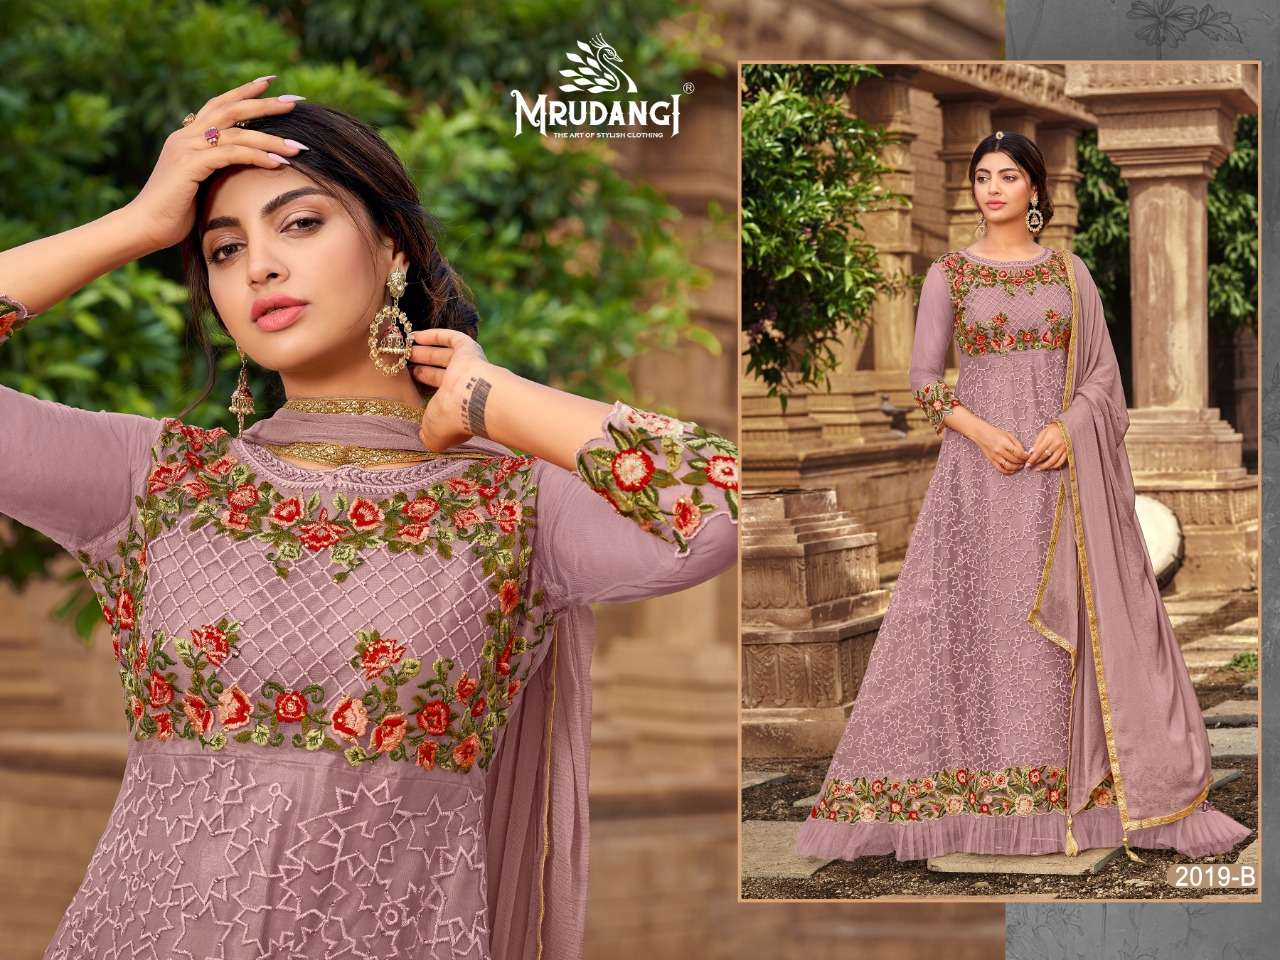 SANJH 2019 COLOURS BY MRUDANGI 2019 TO 2019-C SERIES BEAUTIFUL STYLISH ANARKALI SUITS FANCY COLORFUL CASUAL WEAR & ETHNIC WEAR & READY TO WEAR HEAVY BUTTERFLY NET EMBROIDERED DRESSES AT WHOLESALE PRICE